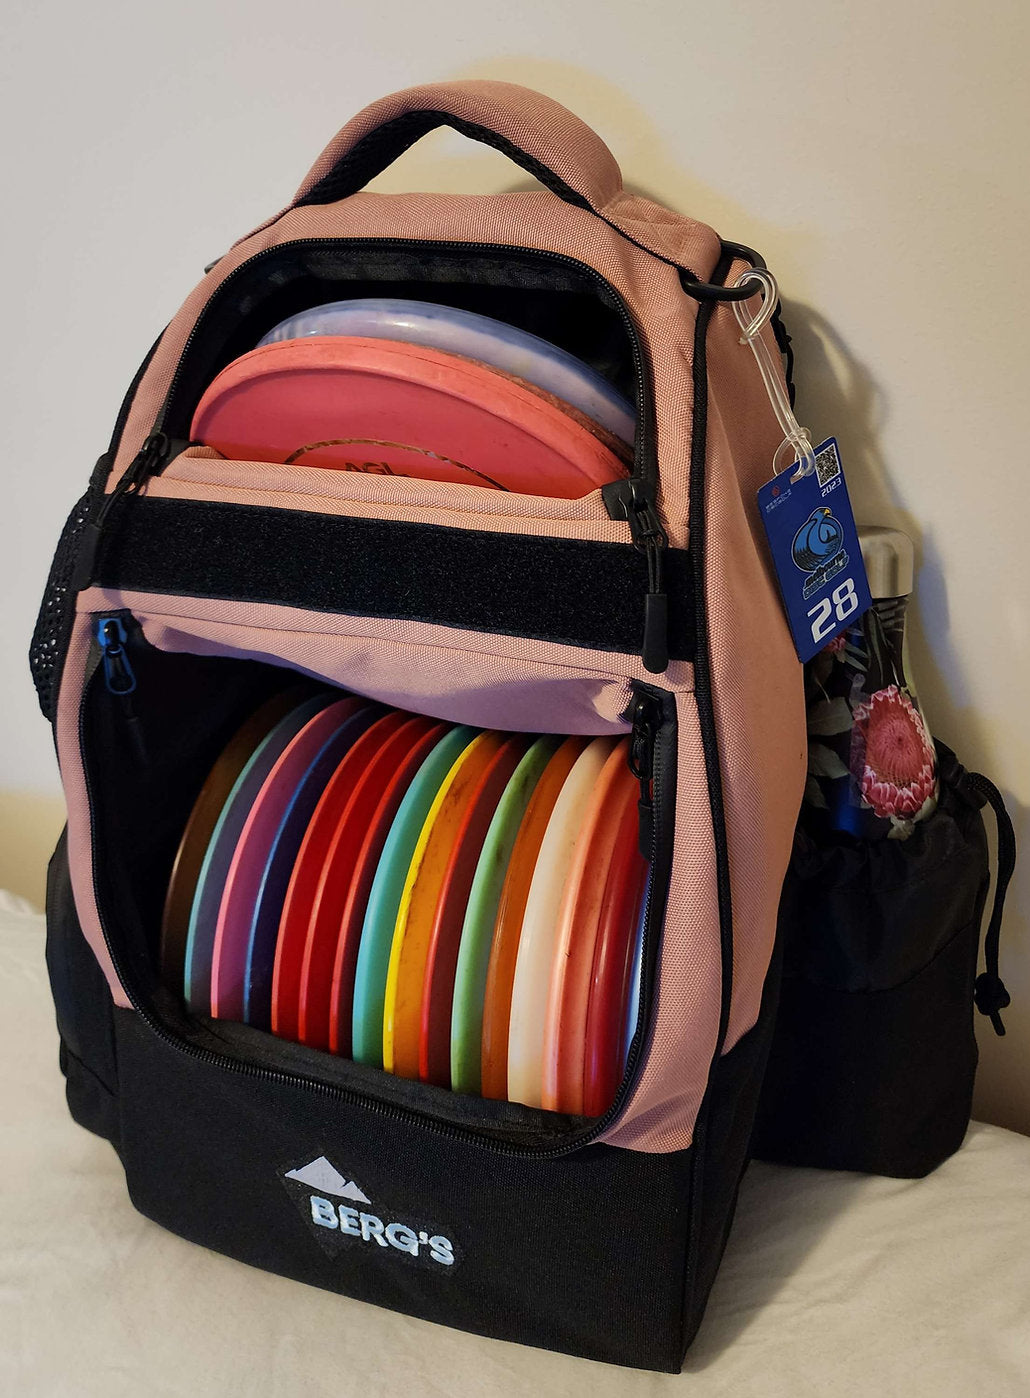 Berg's Manta - The Recycled Disc Golf Backpack